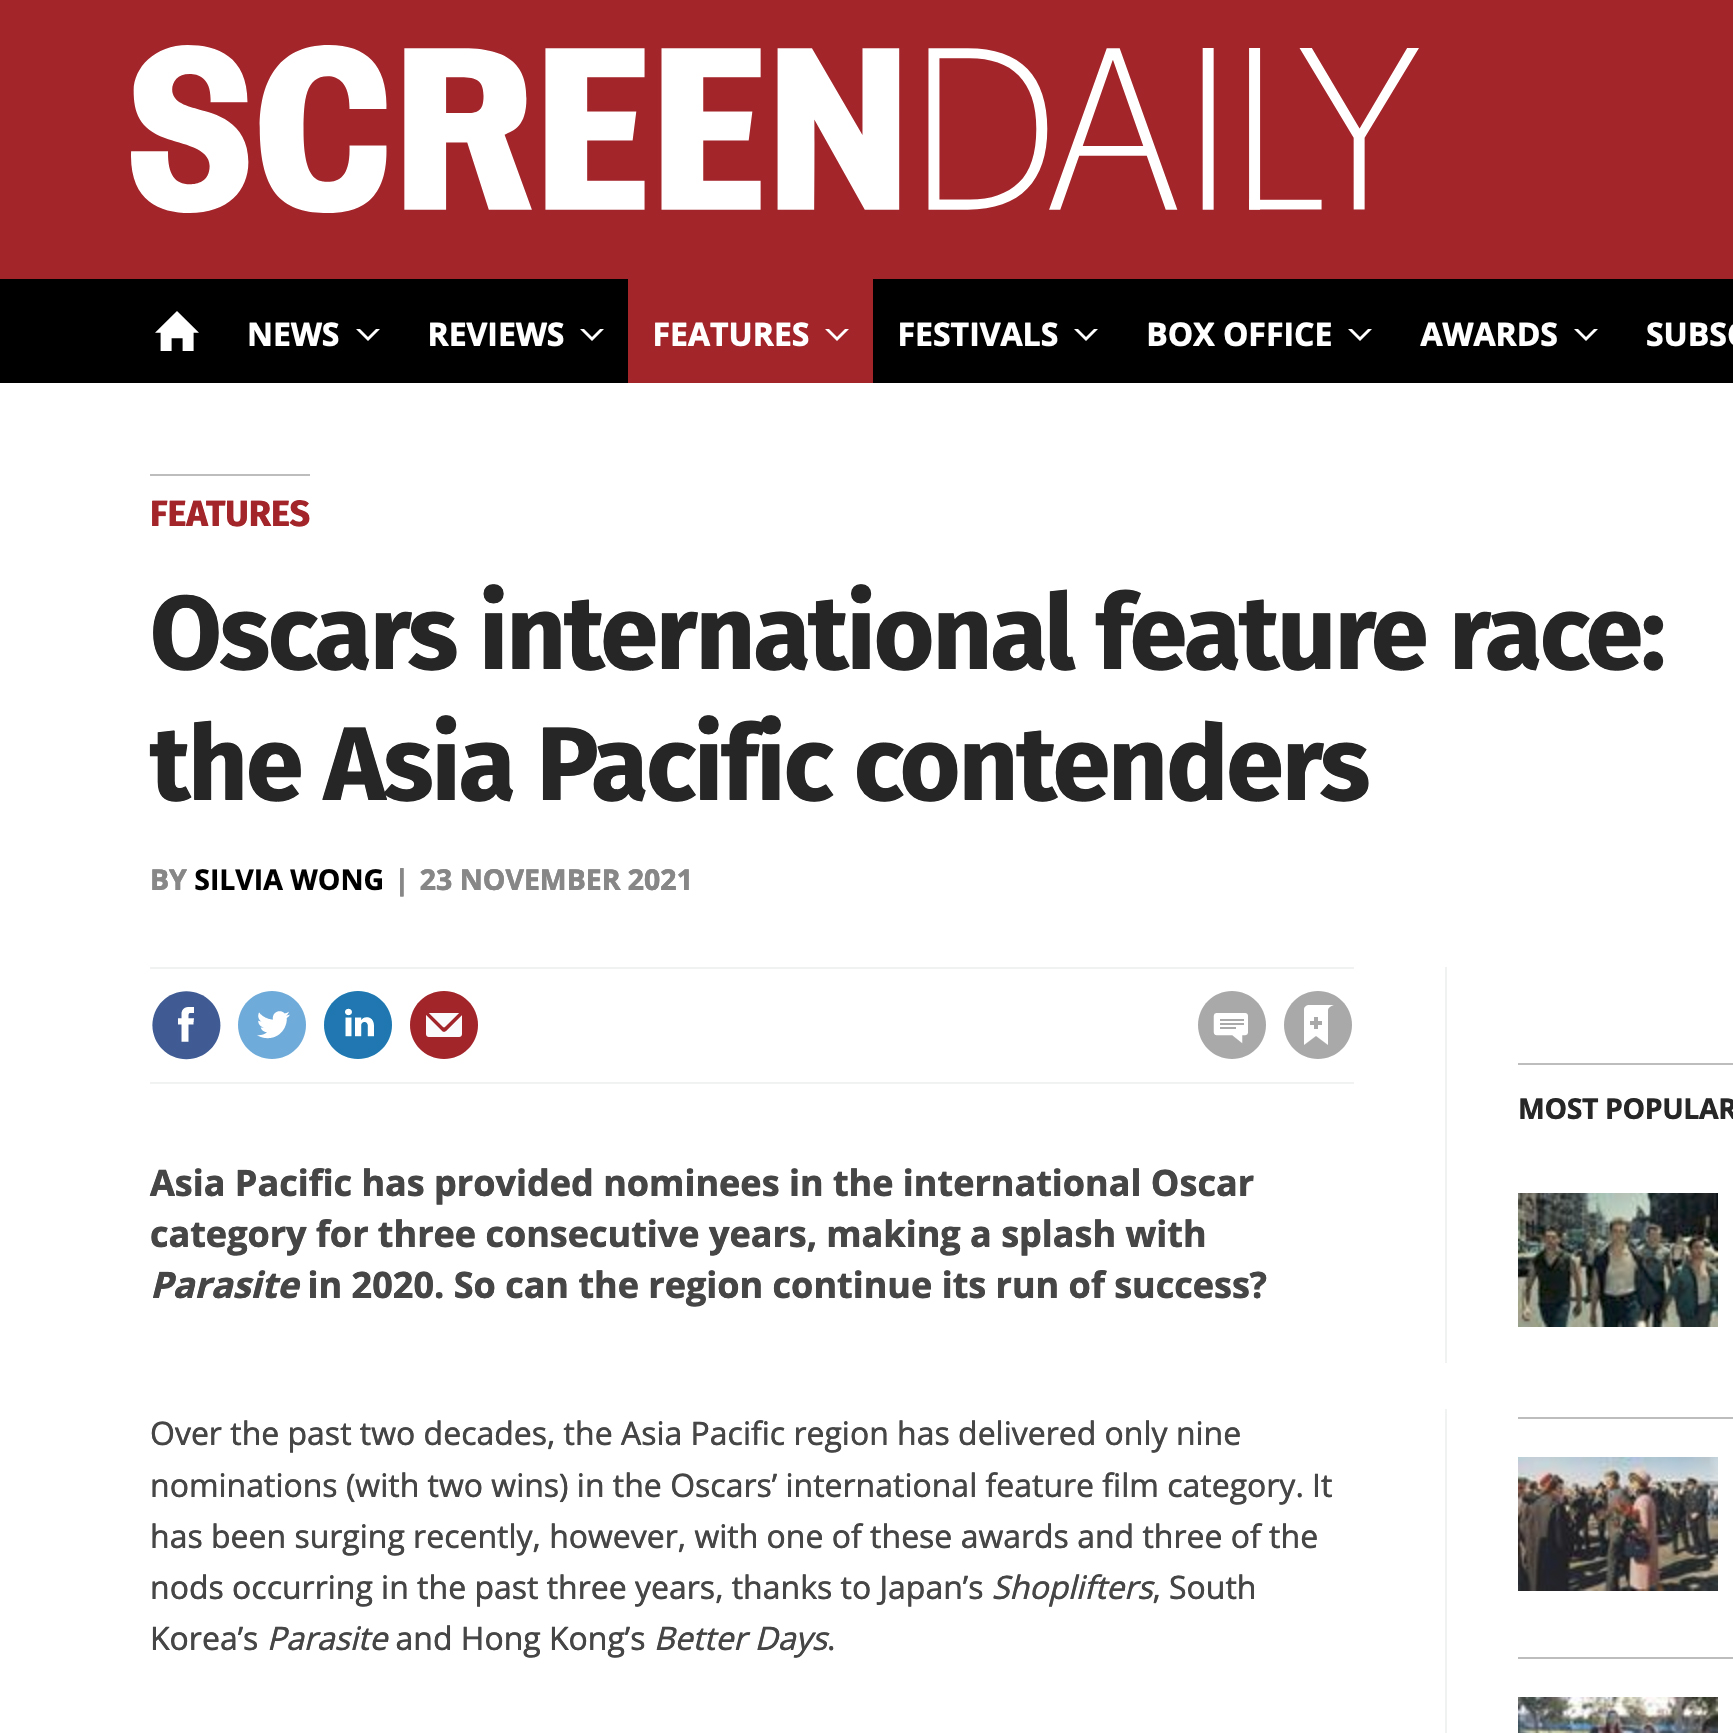 Oscars International Feature Race: The Asia Pacific Contenders